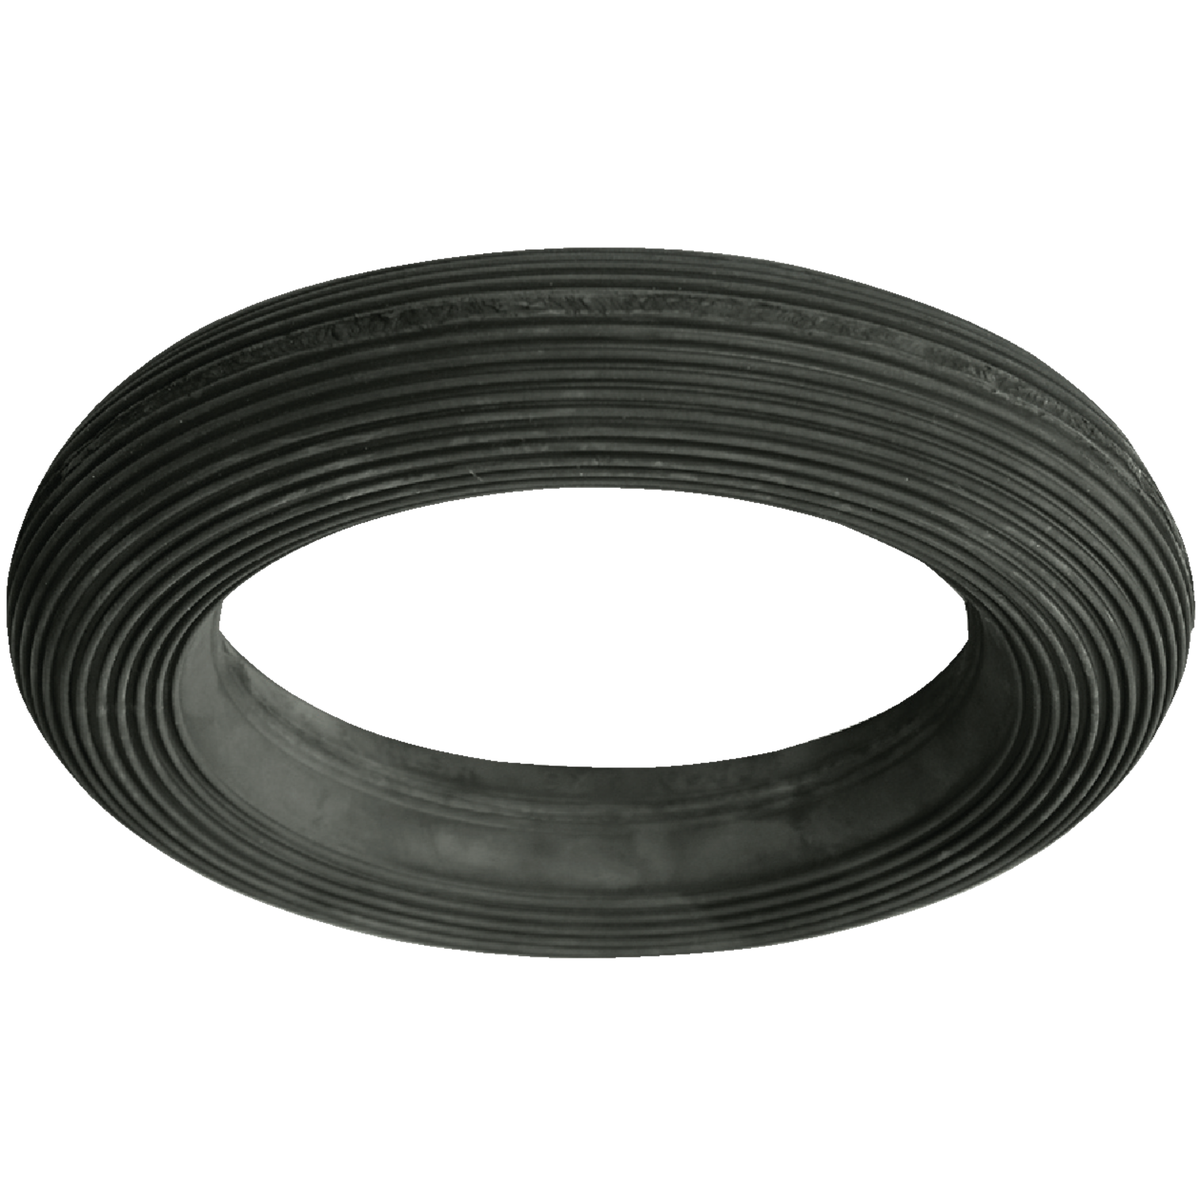 Rubber Sewer & Drain O-Ring